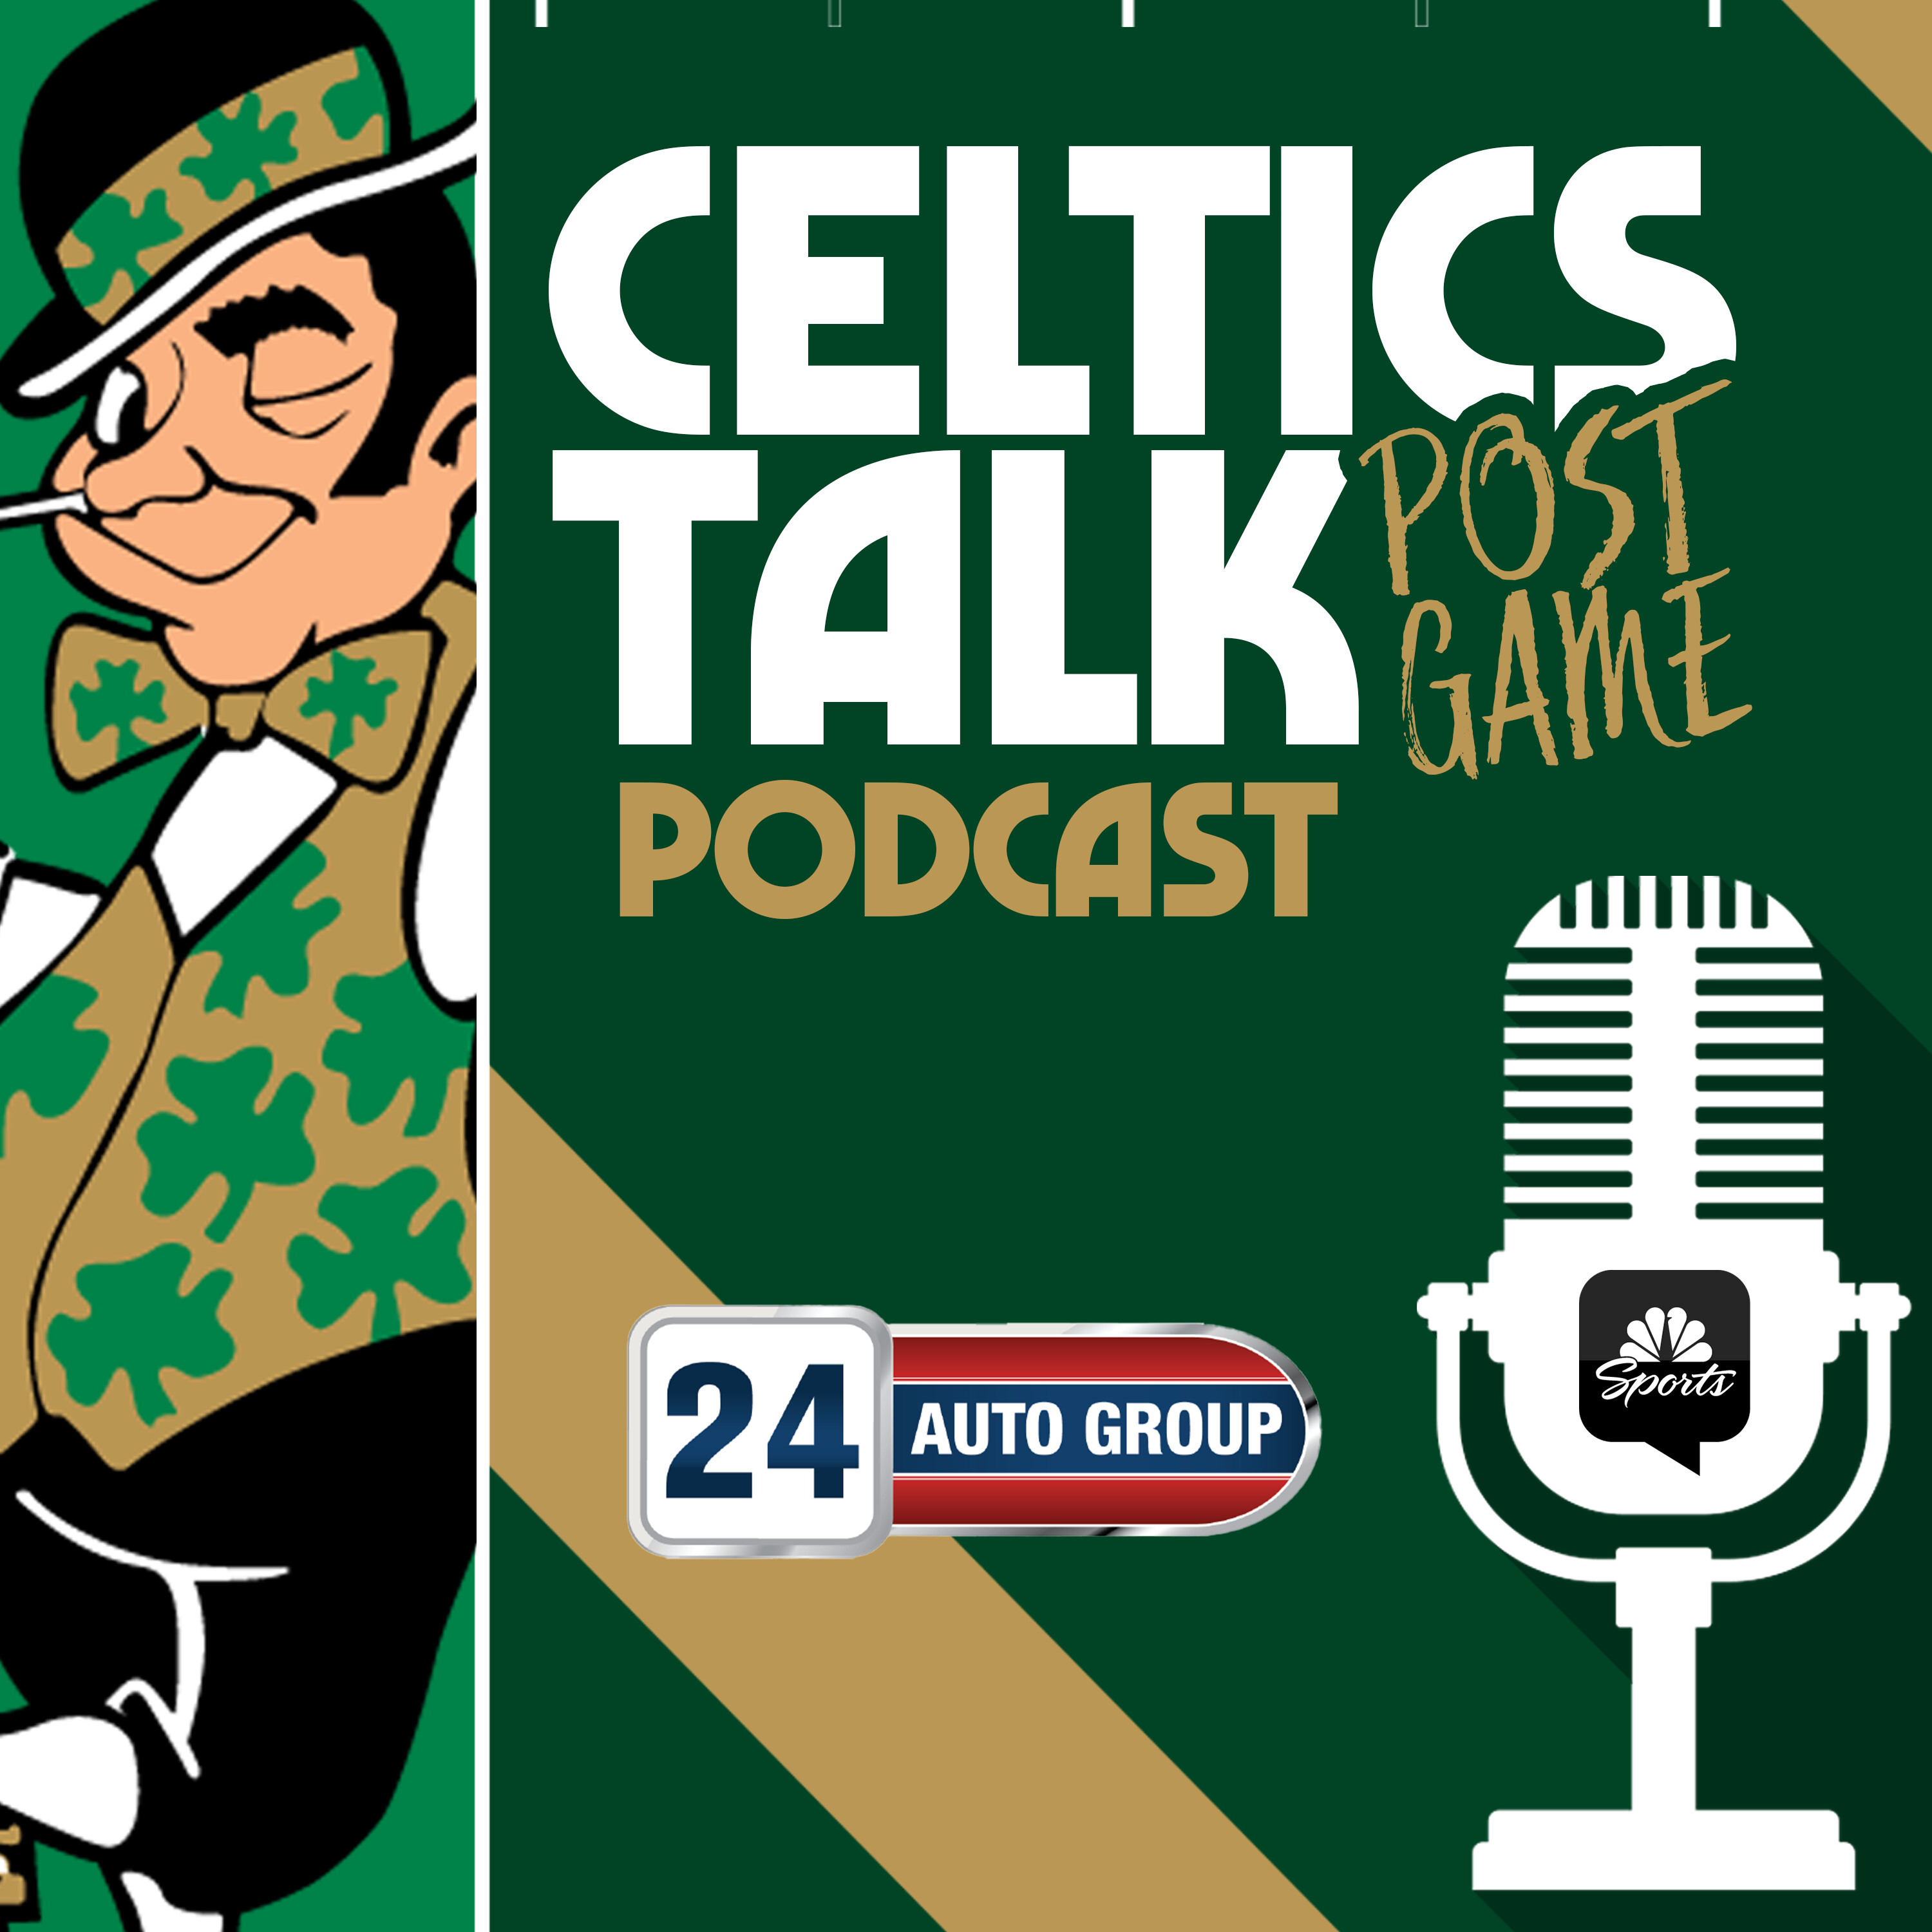 POSTGAME POD: Shorthanded Celtics able to overcome double-digit deficit to get the win